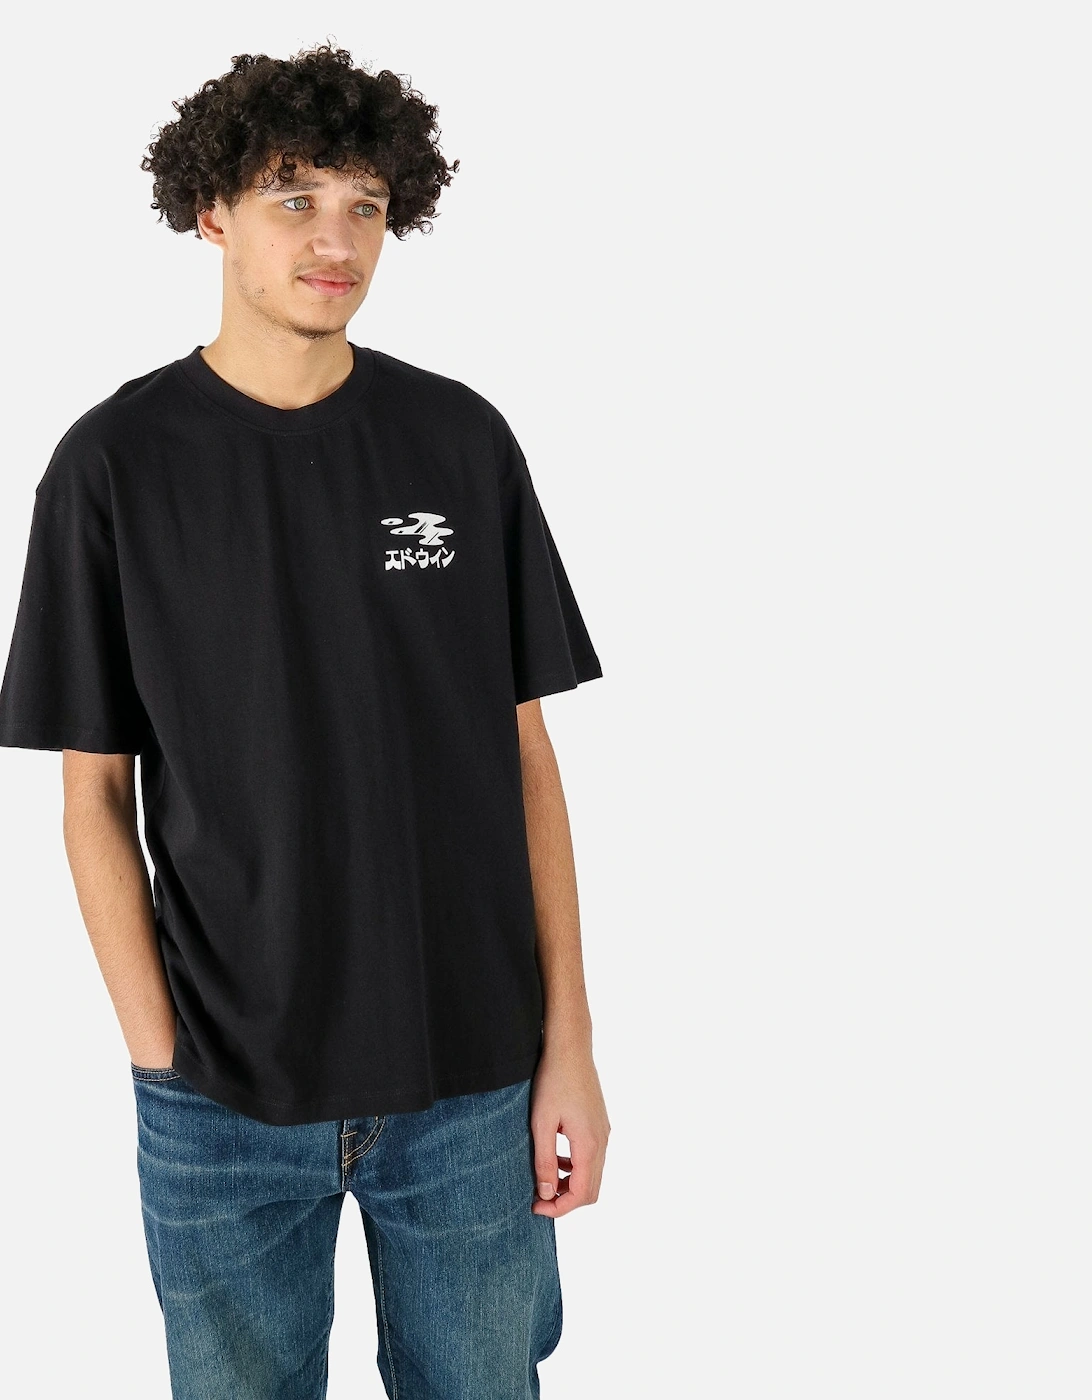 Stay Hydrated Black Tee